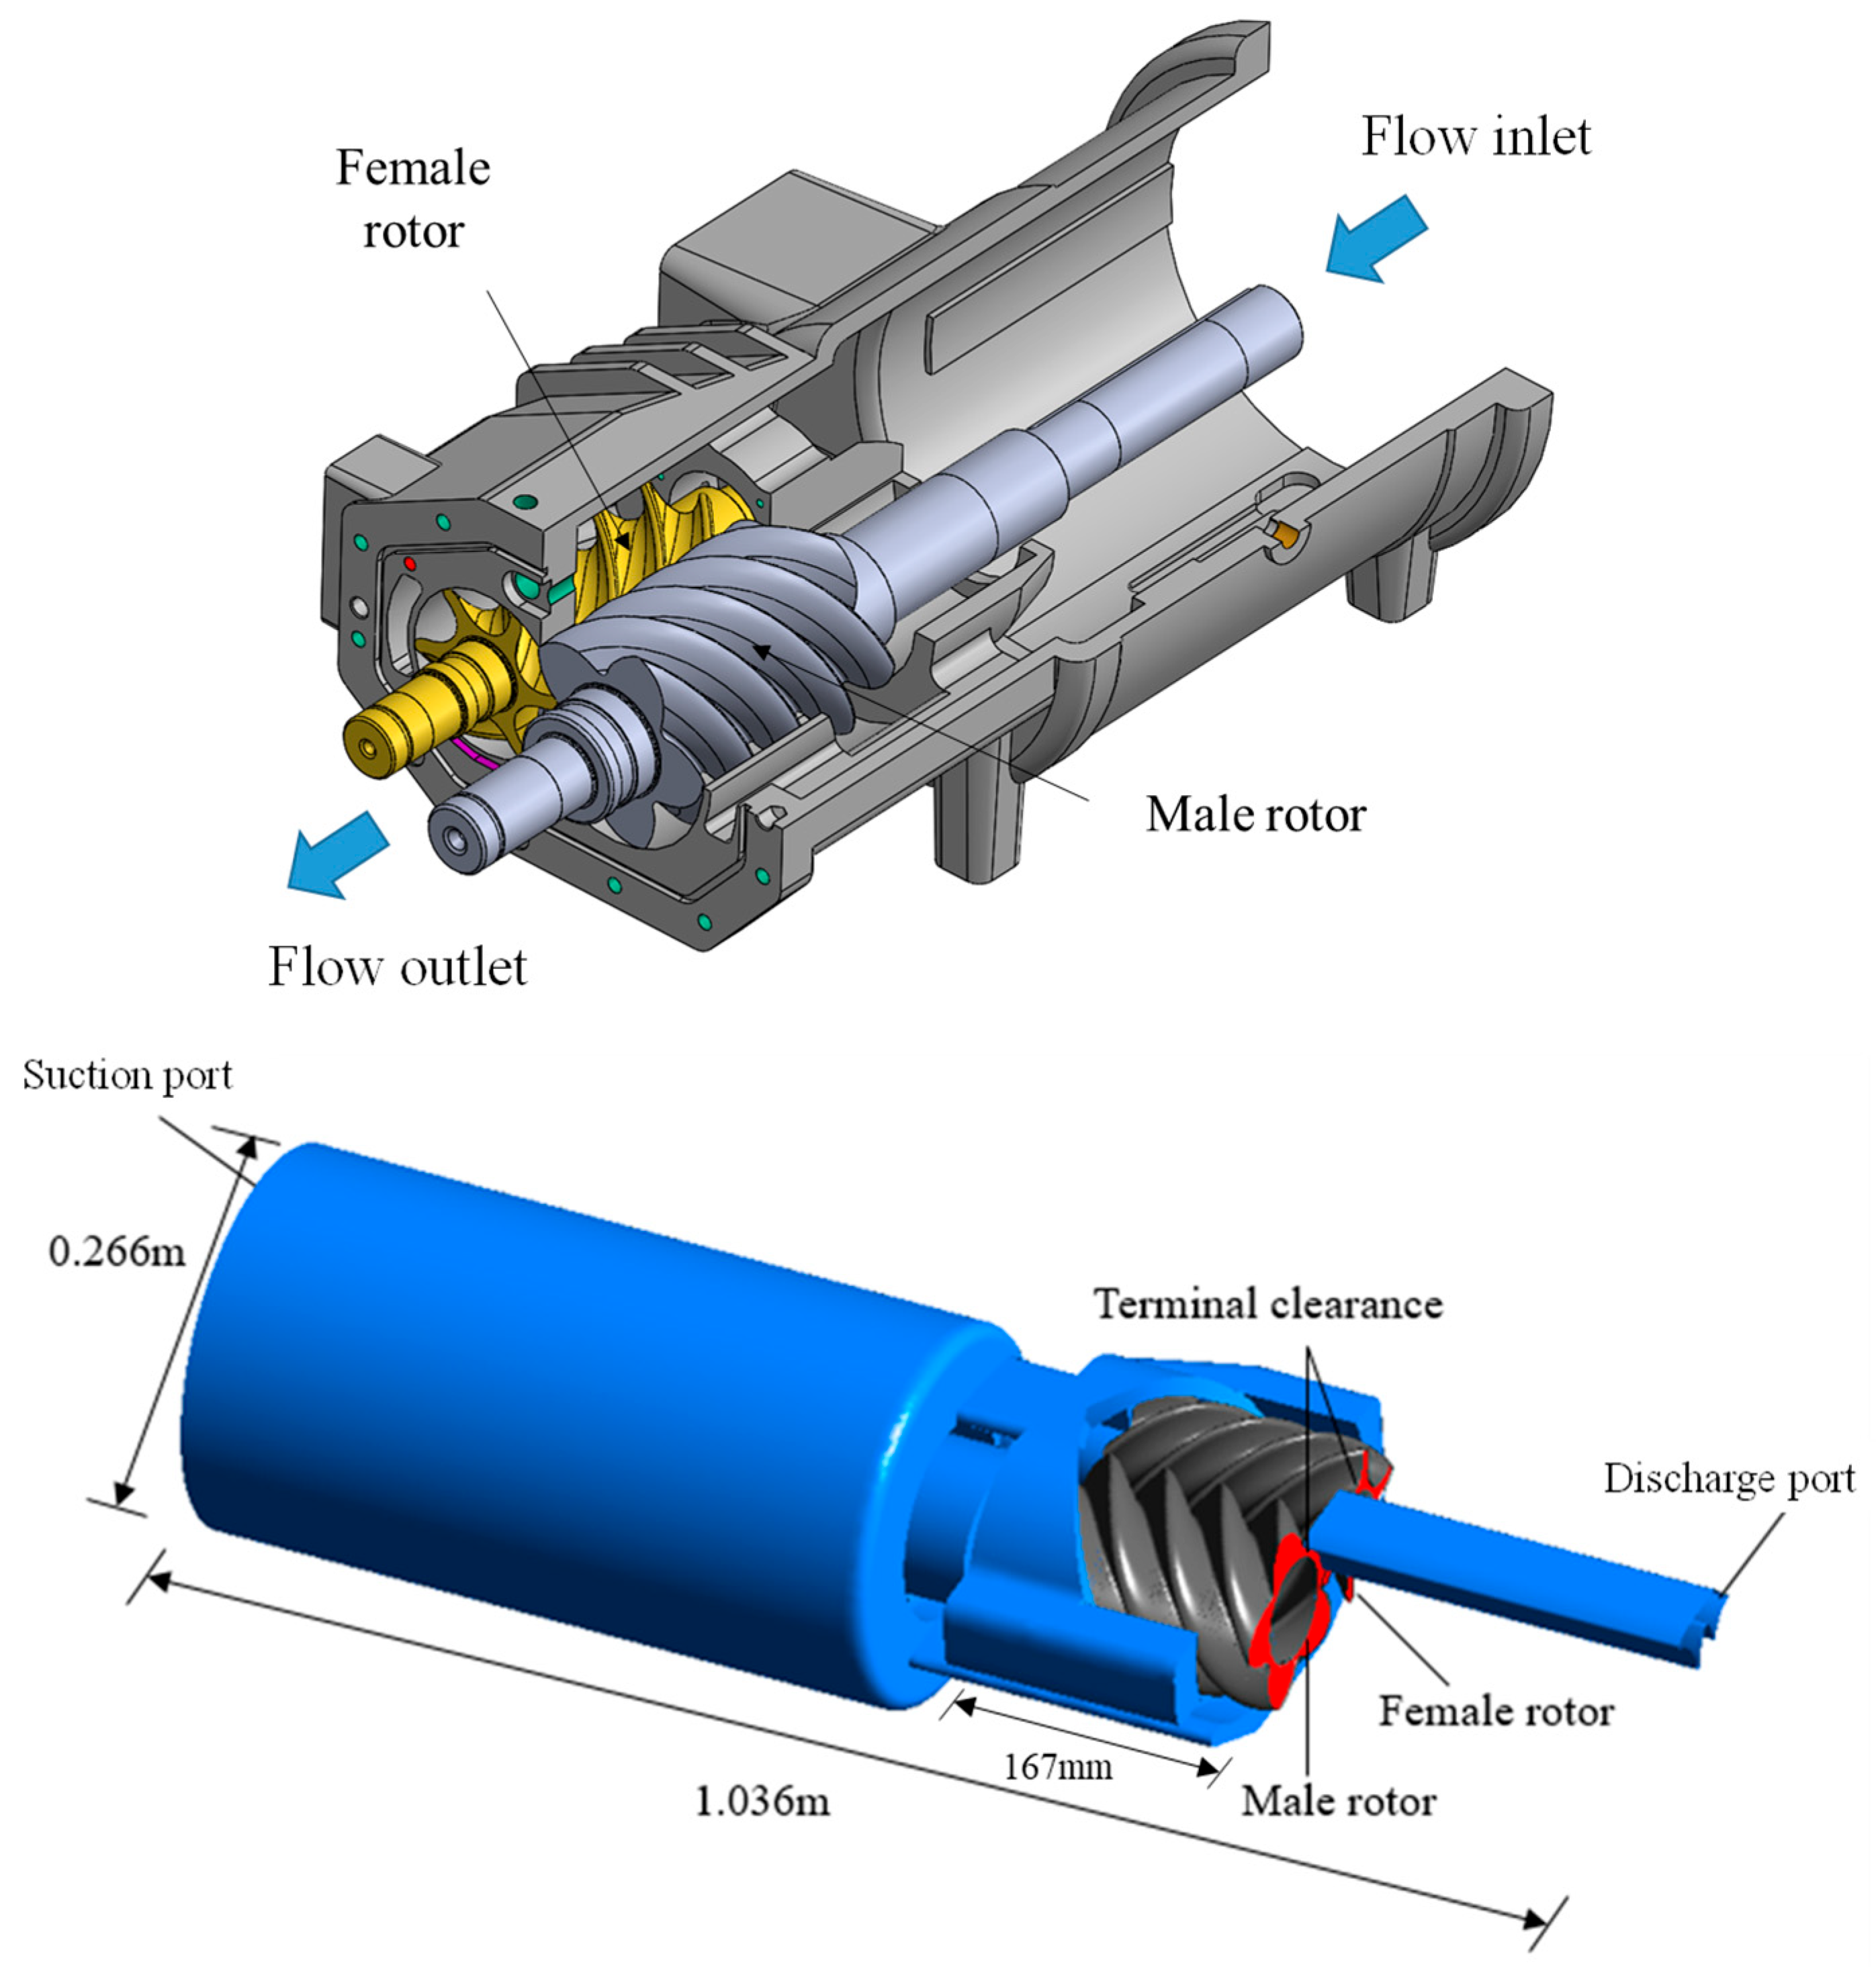 The geometry of the screw compressor and the fluid domain